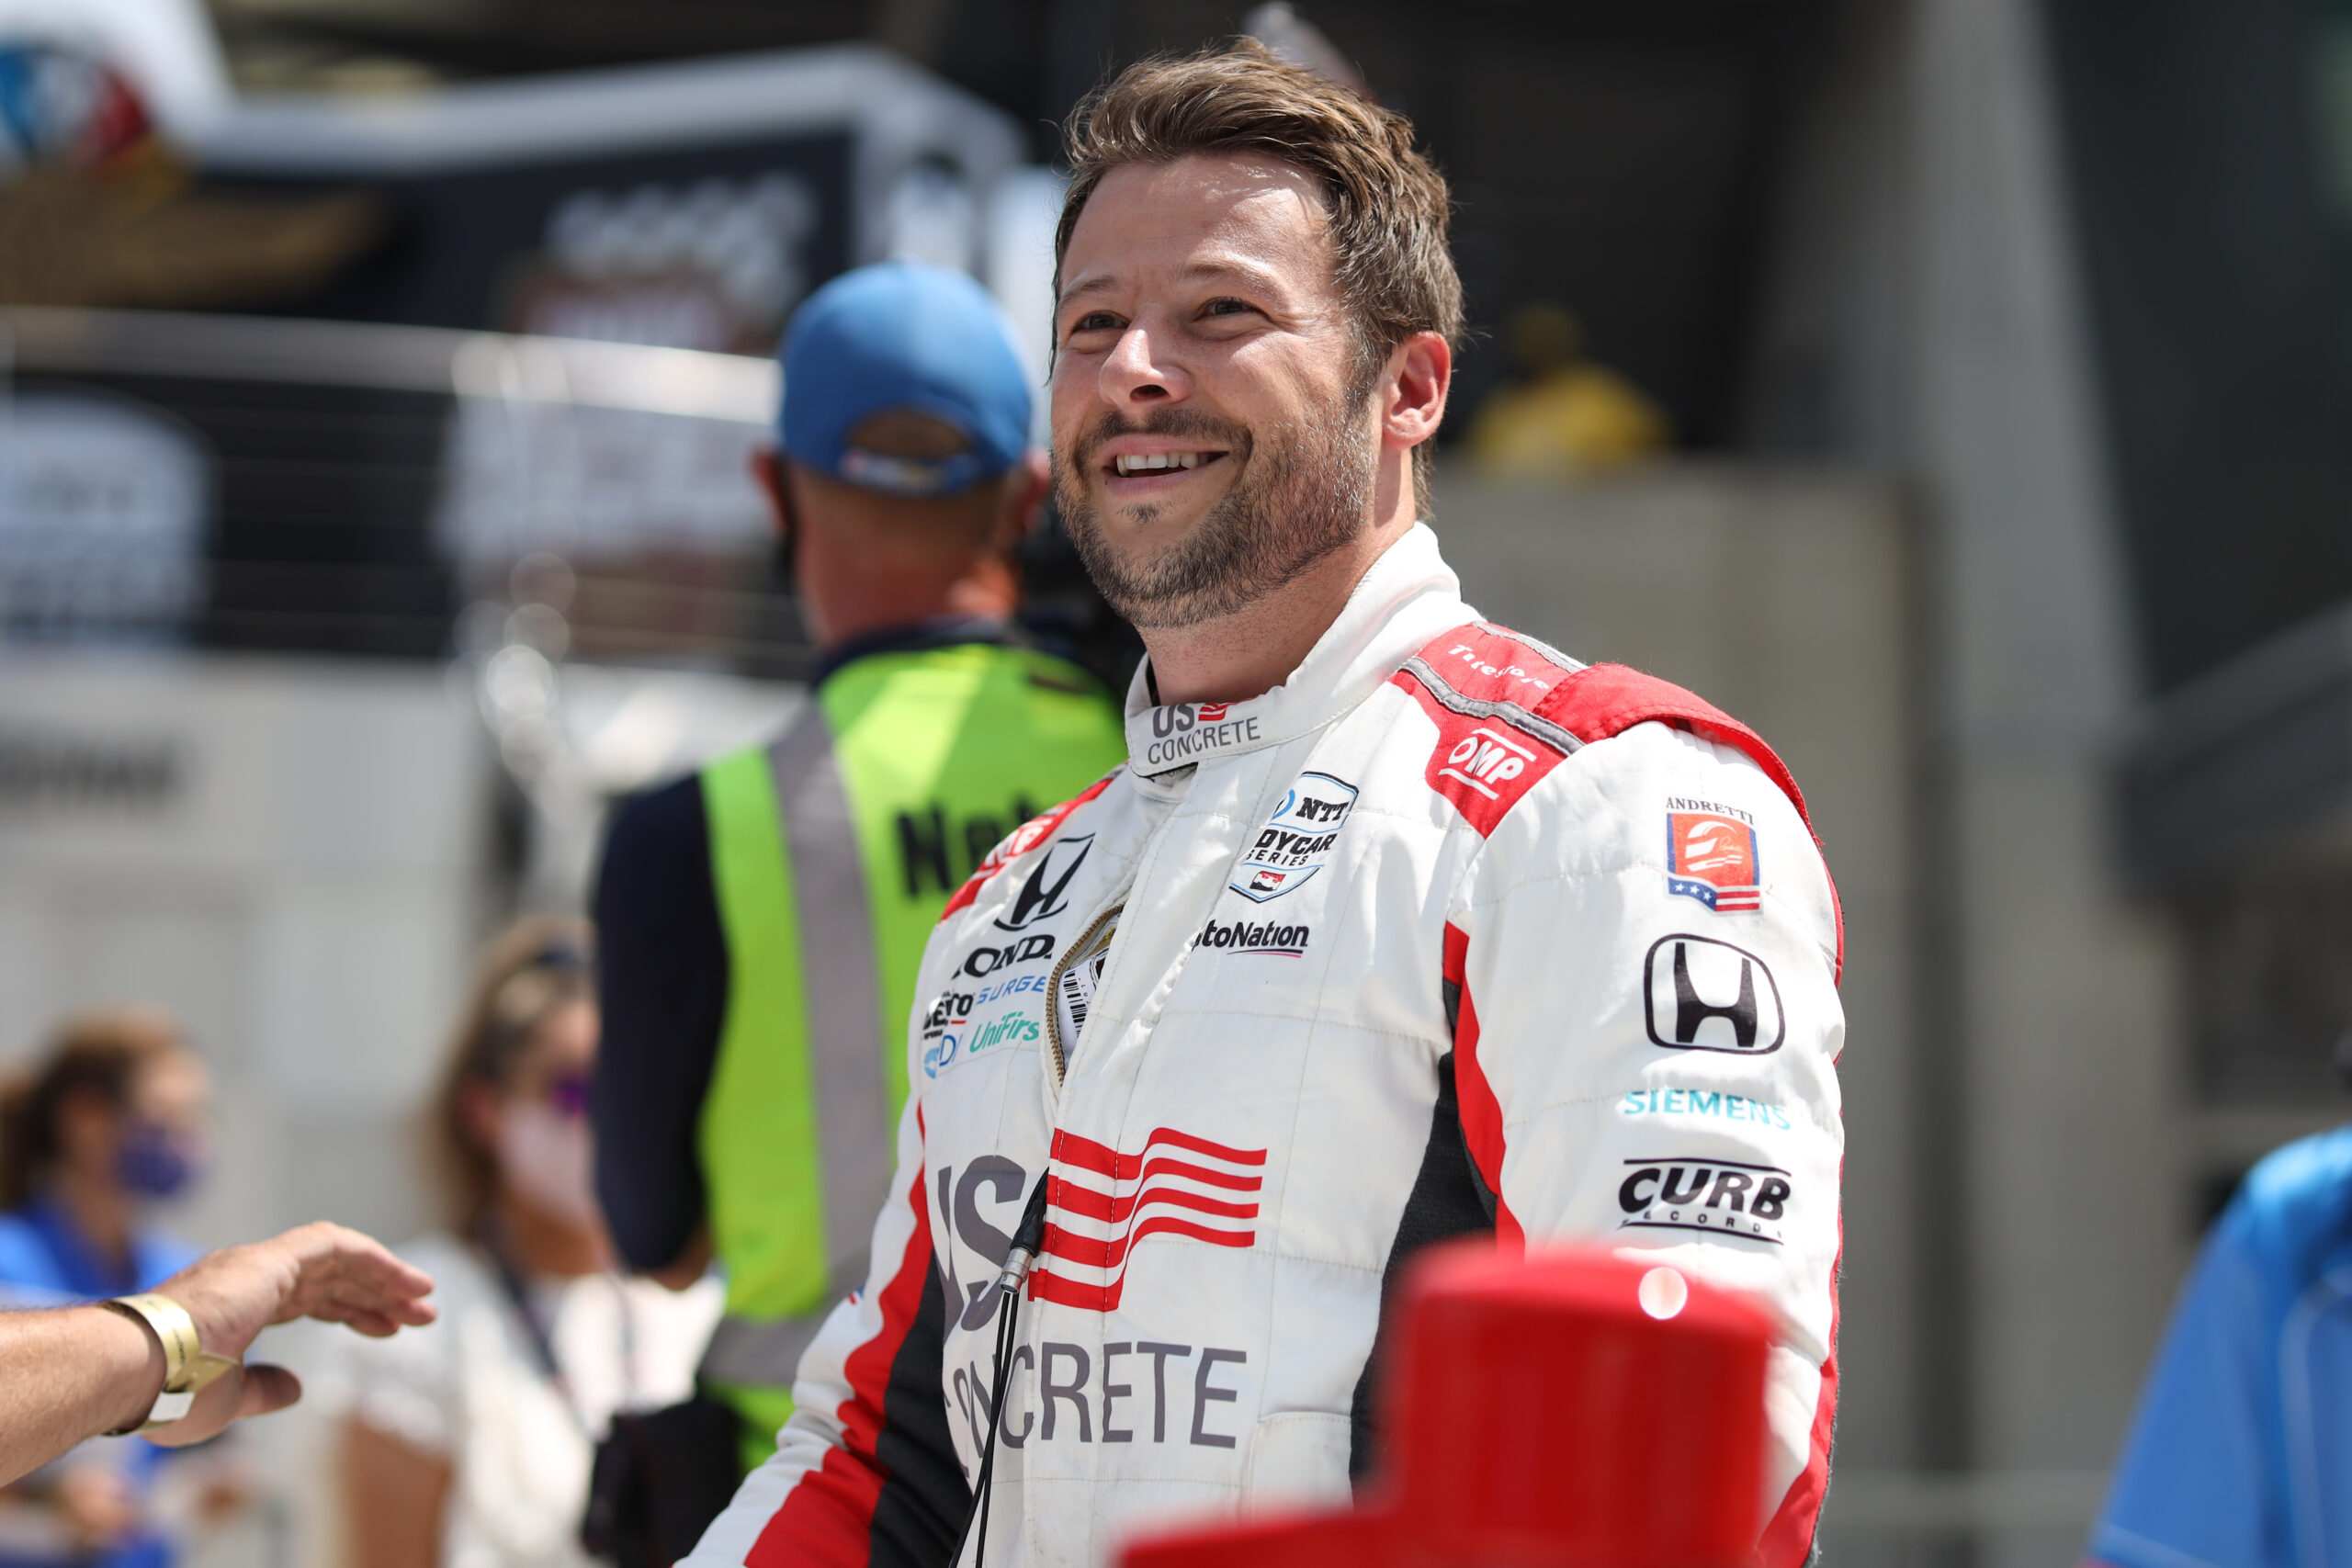 The third-generation Andretti star was all smiles Saturday. (Credit: Chris Owens / IndyCar Media)